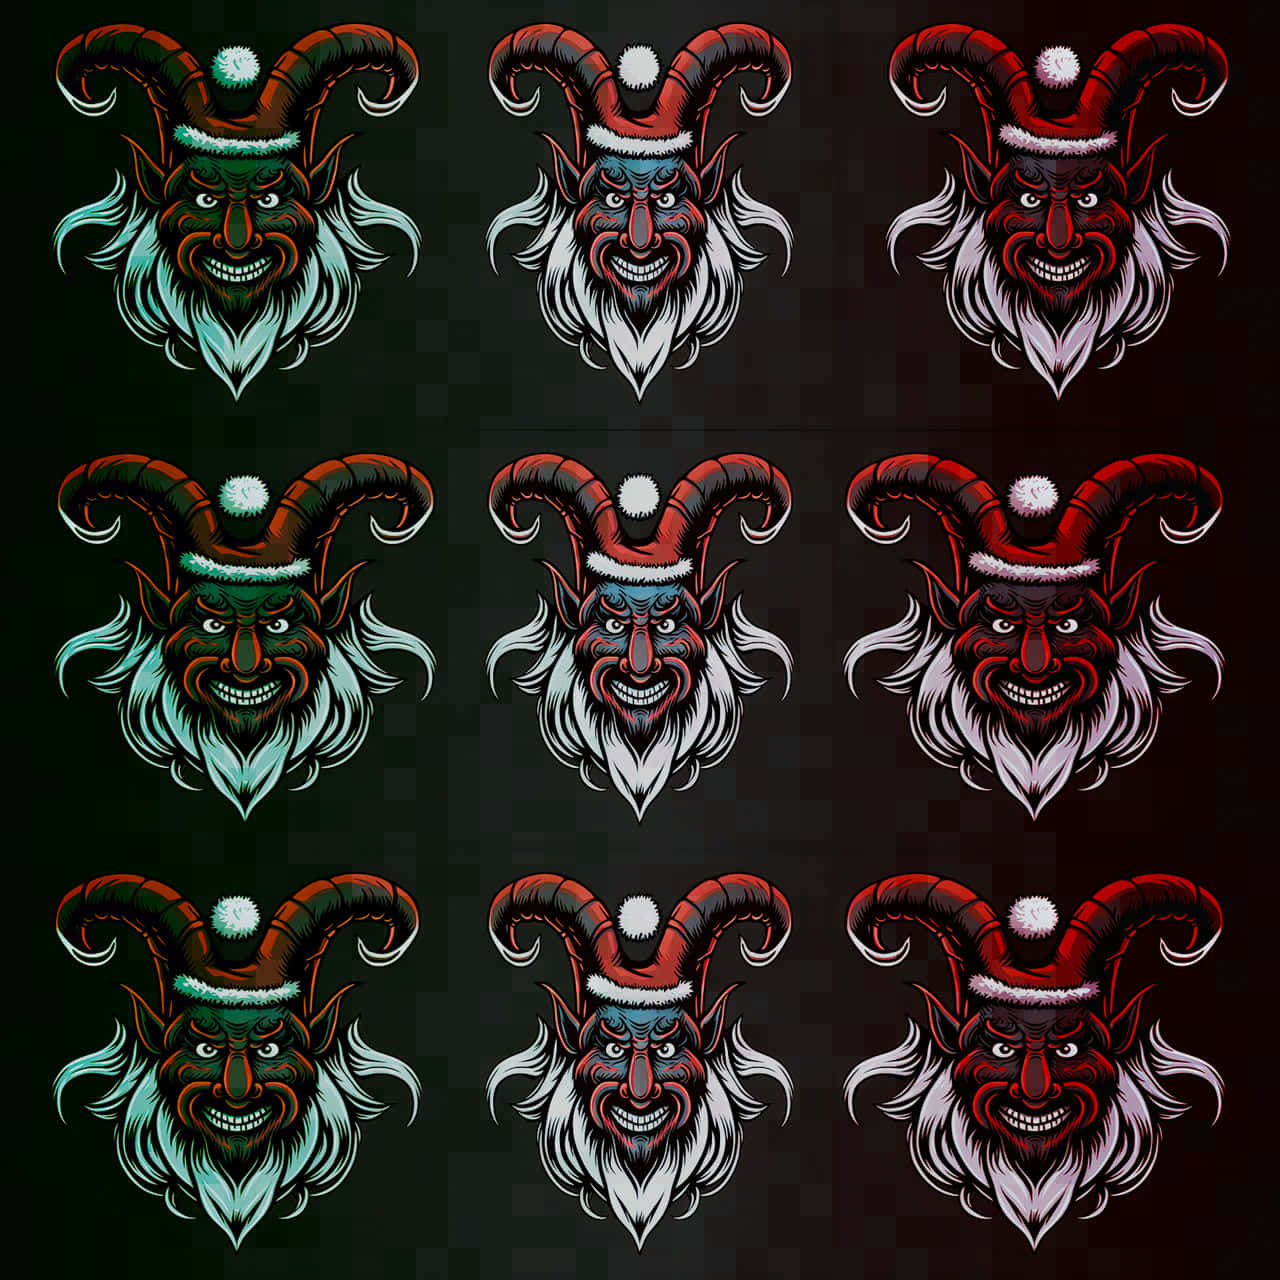 A Set Of Devil Heads With Horns On A Black Background Wallpaper